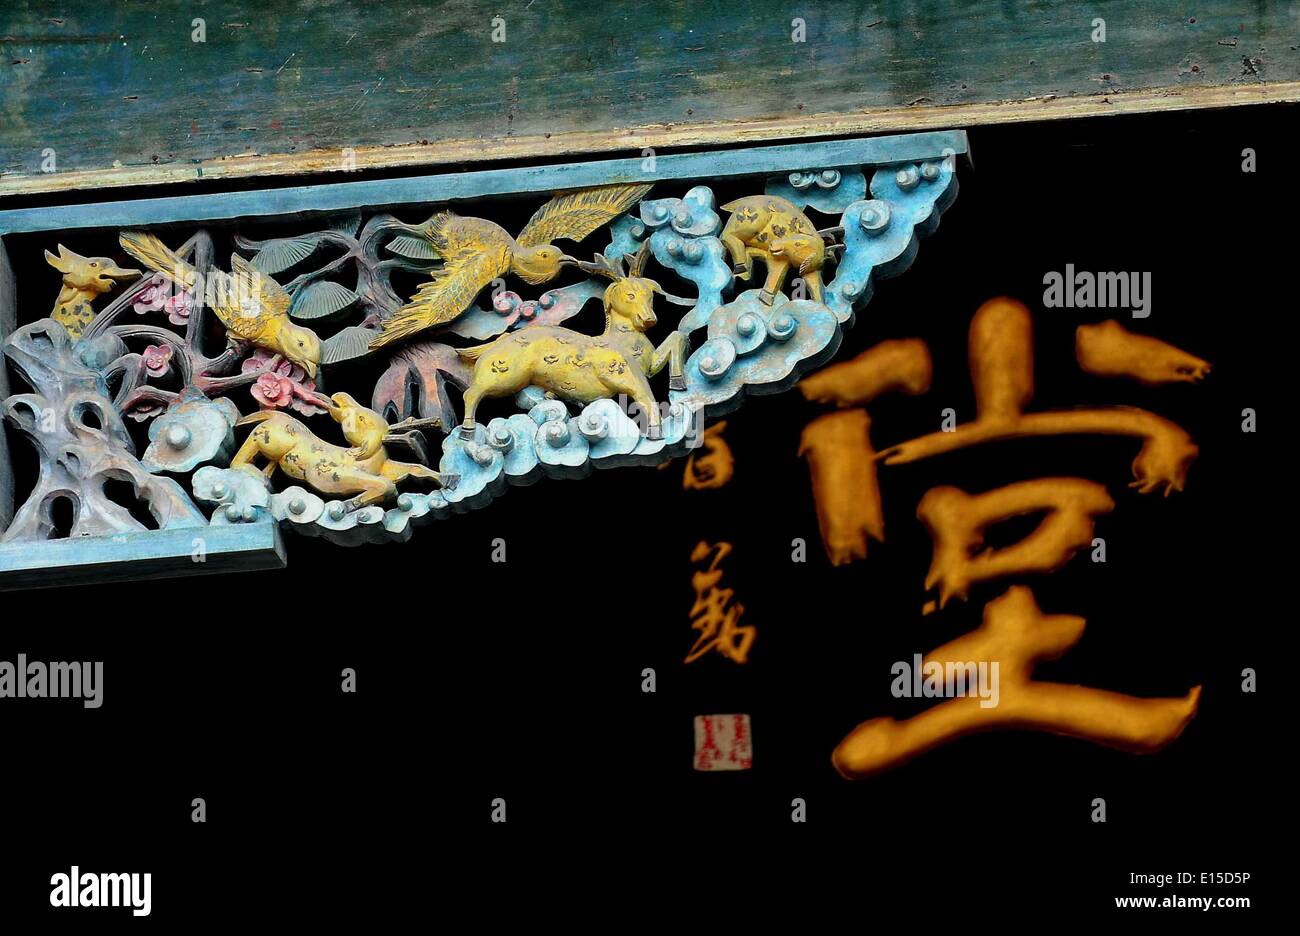 (140523) -- ZHENGZHOU, May 23, 2014 (Xinhua) -- Photo taken on July 15, 2009 shows a coloured wood sculpture under the eaves of a passageway at Ma Piyao's Mansion, a 19th-century residential complex, in Jiangcun Township of Anyang County, central China's Henan Province. A large number of architectural sculptures have been preserved in historical sites of Henan, which is one of the cradles of the Chinese civilization. Many of the sculptures, created from stones, bricks, or wood, were used as building parts of residences, shrines and memorial archways, among other architecture types. Underlining Stock Photo